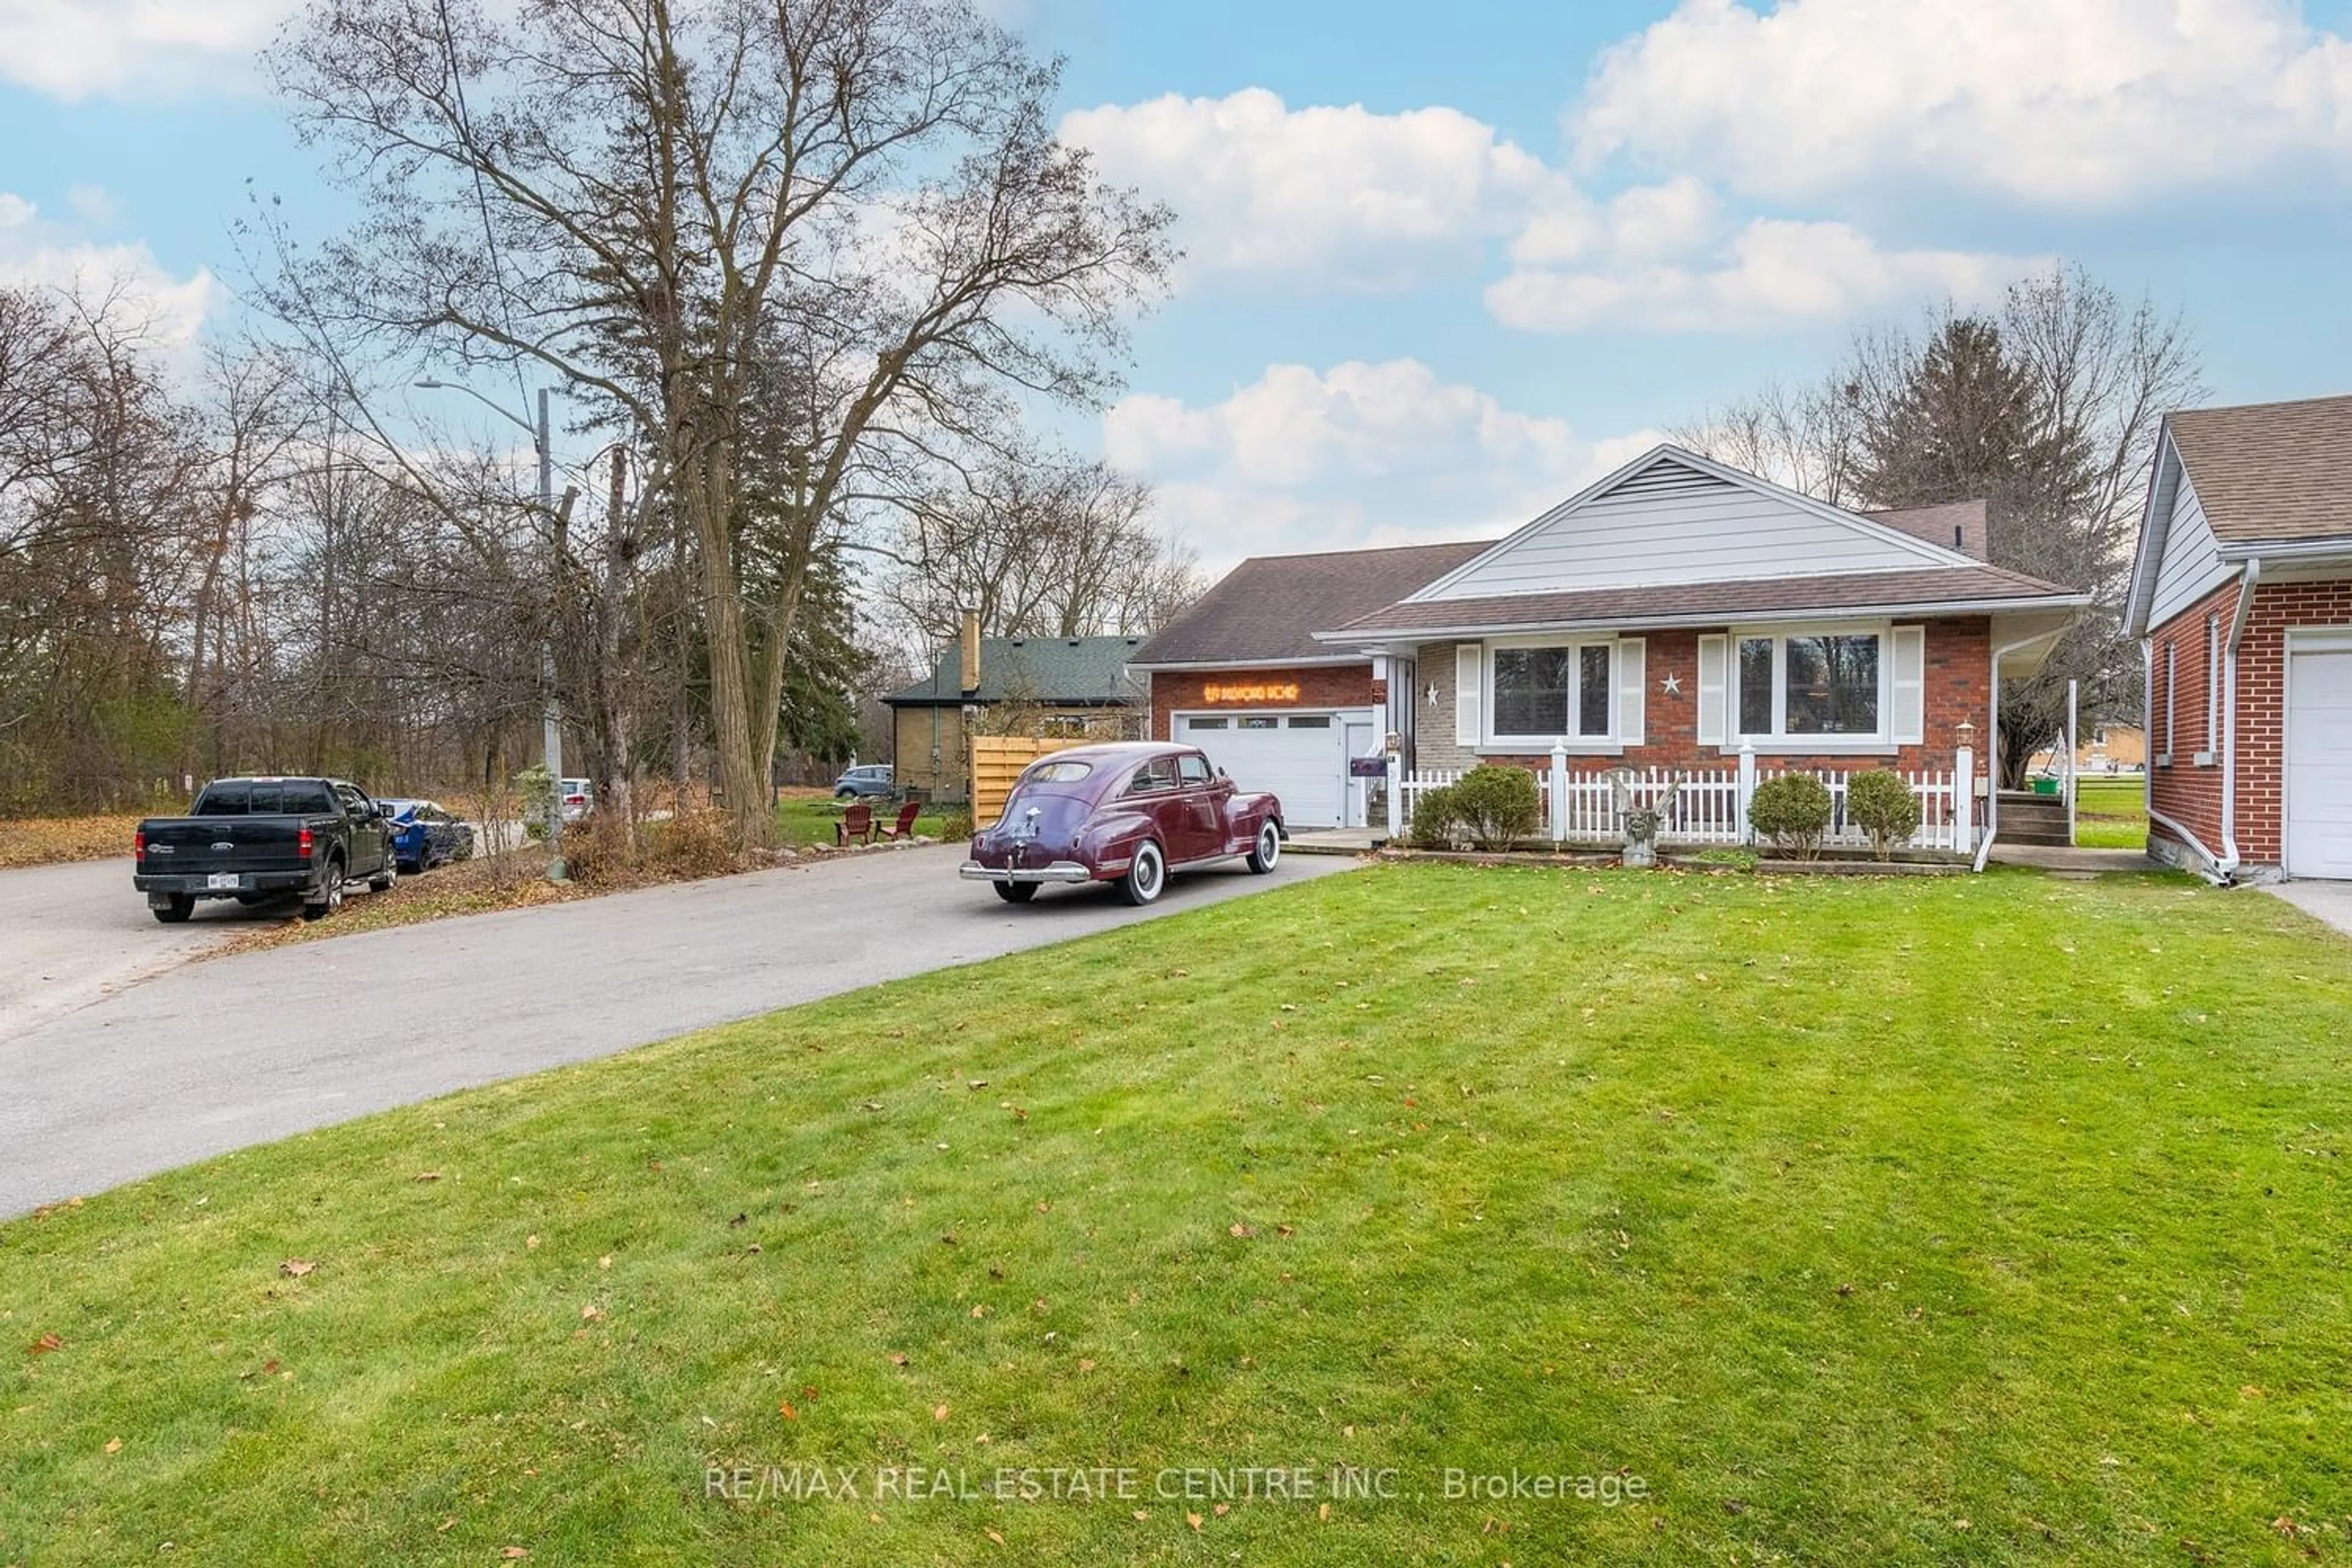 Frontside or backside of a home for 271 Bedford Rd, Kitchener Ontario N2G 3A7